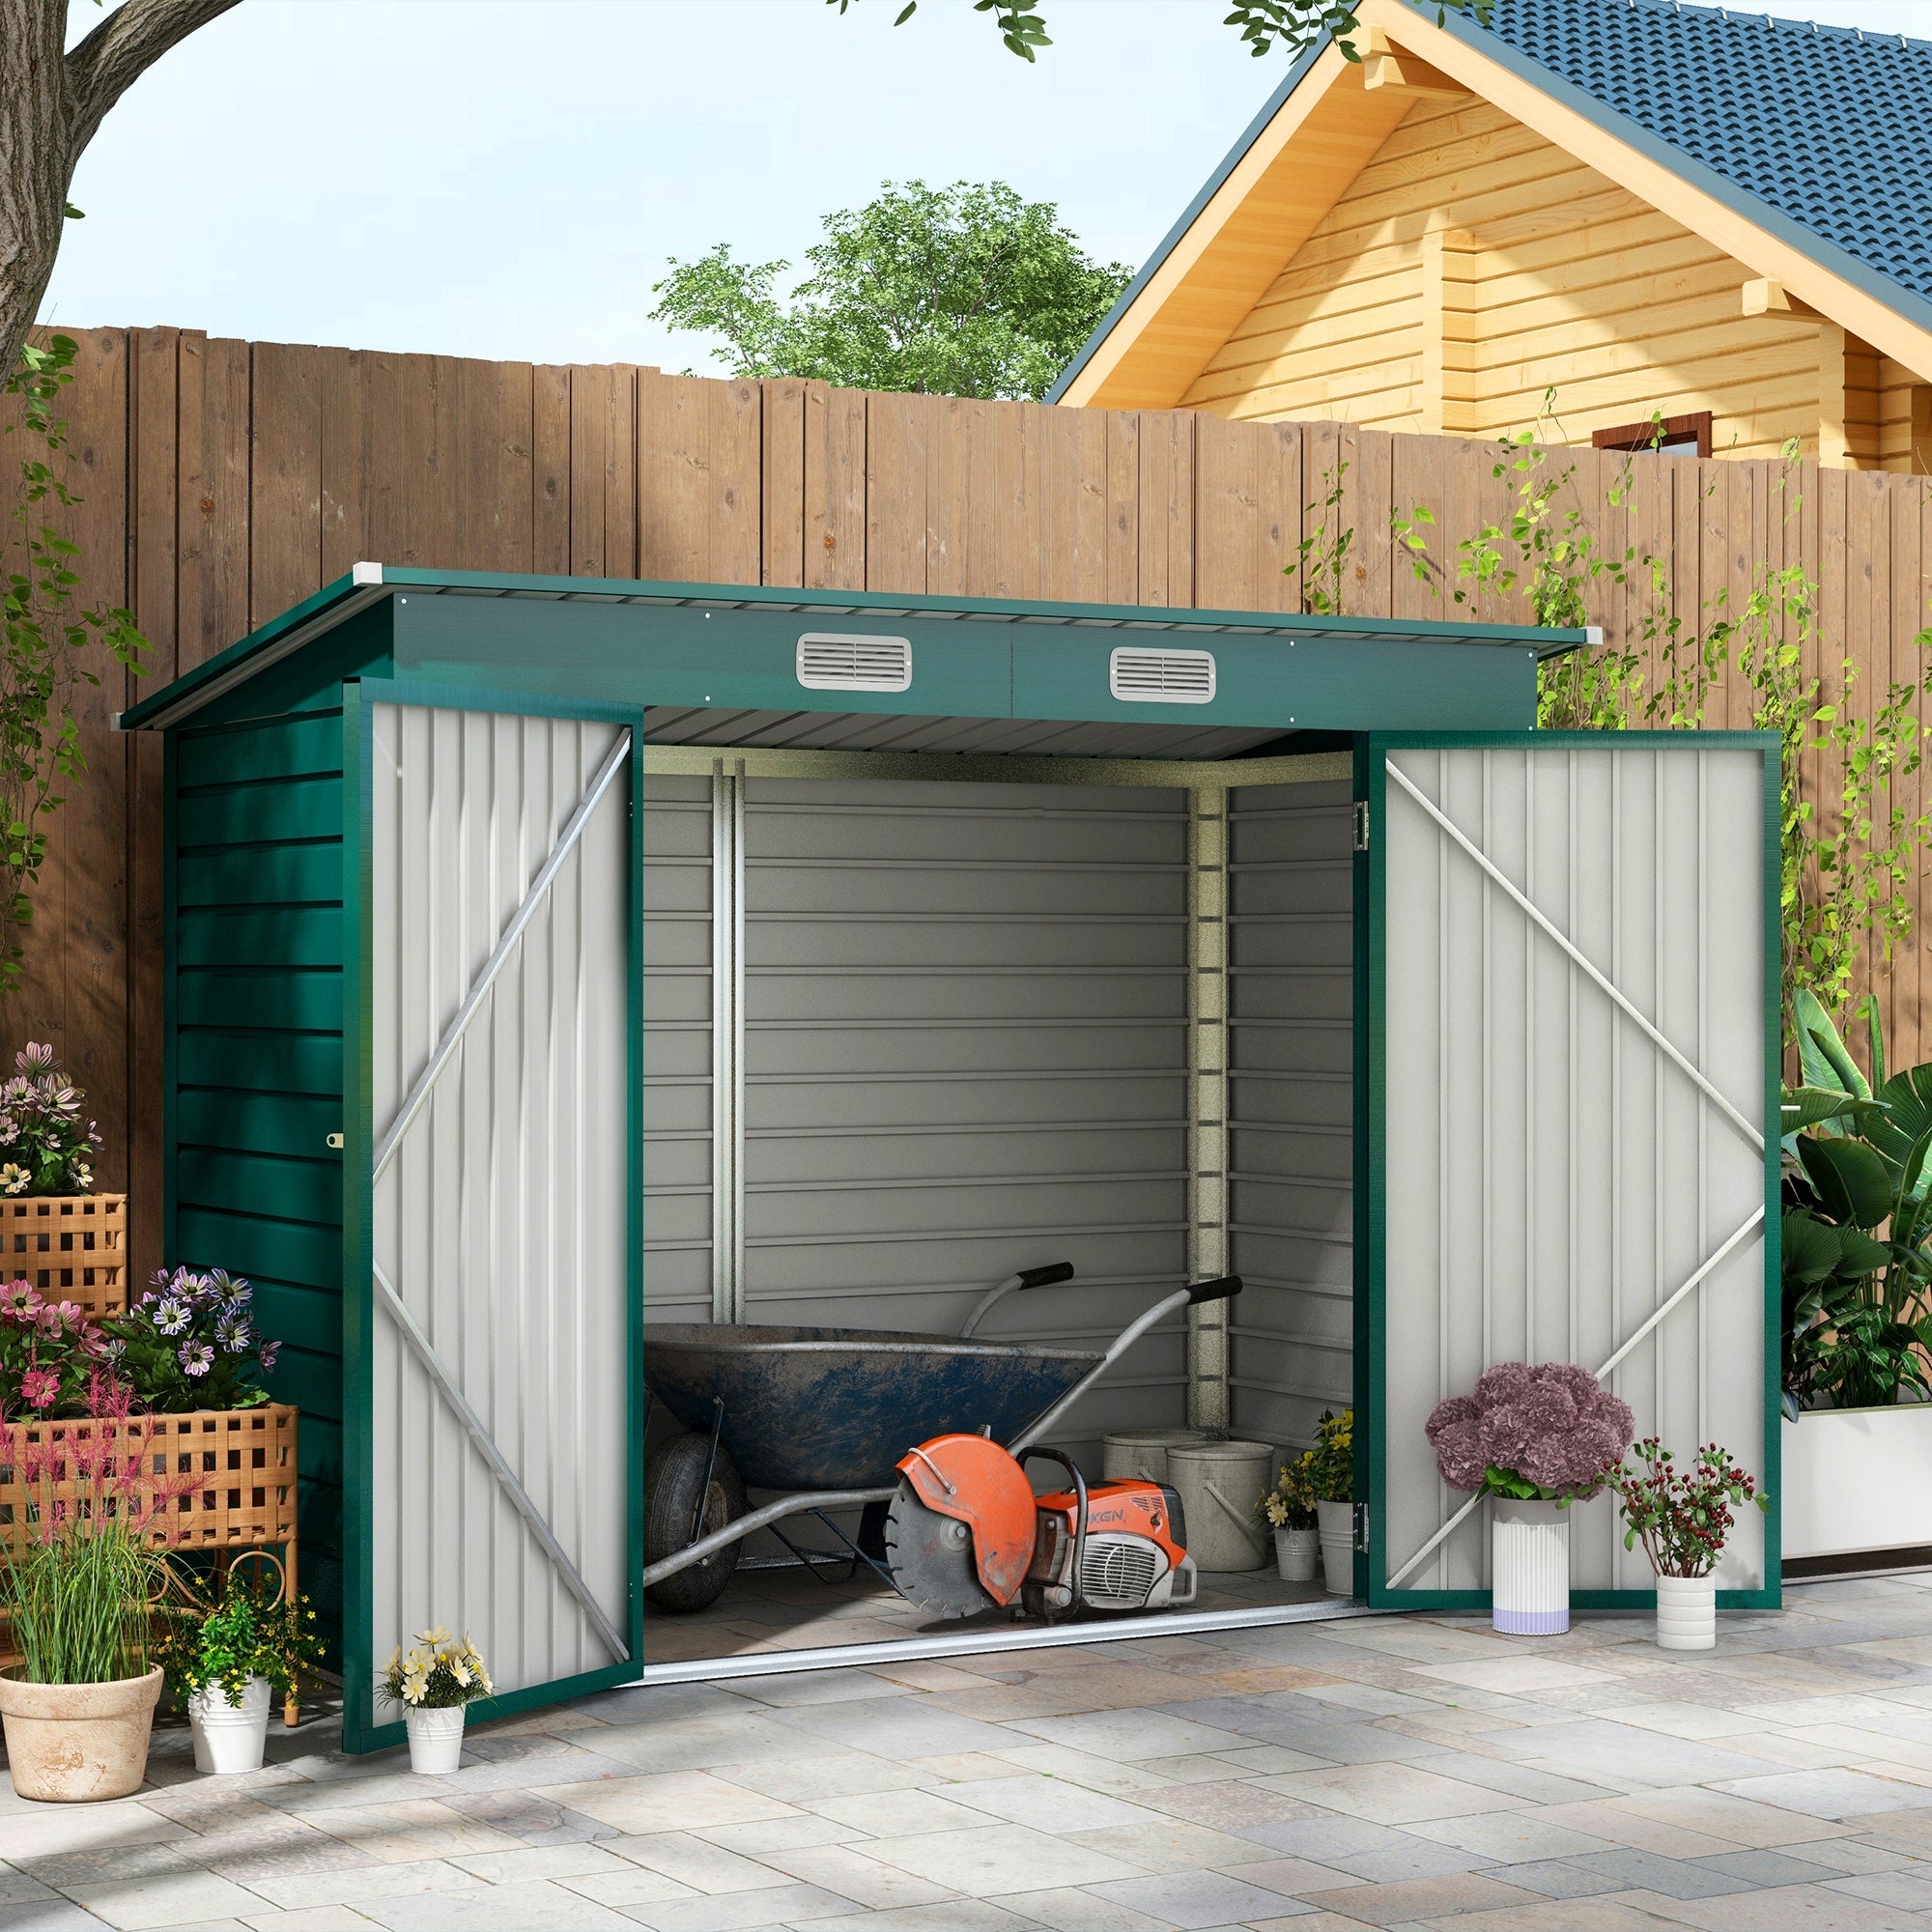 8 x 4FT Galvanised Garden Storage Shed, Metal Outdoor Shed with Double Doors and 2 Vents, Green-1